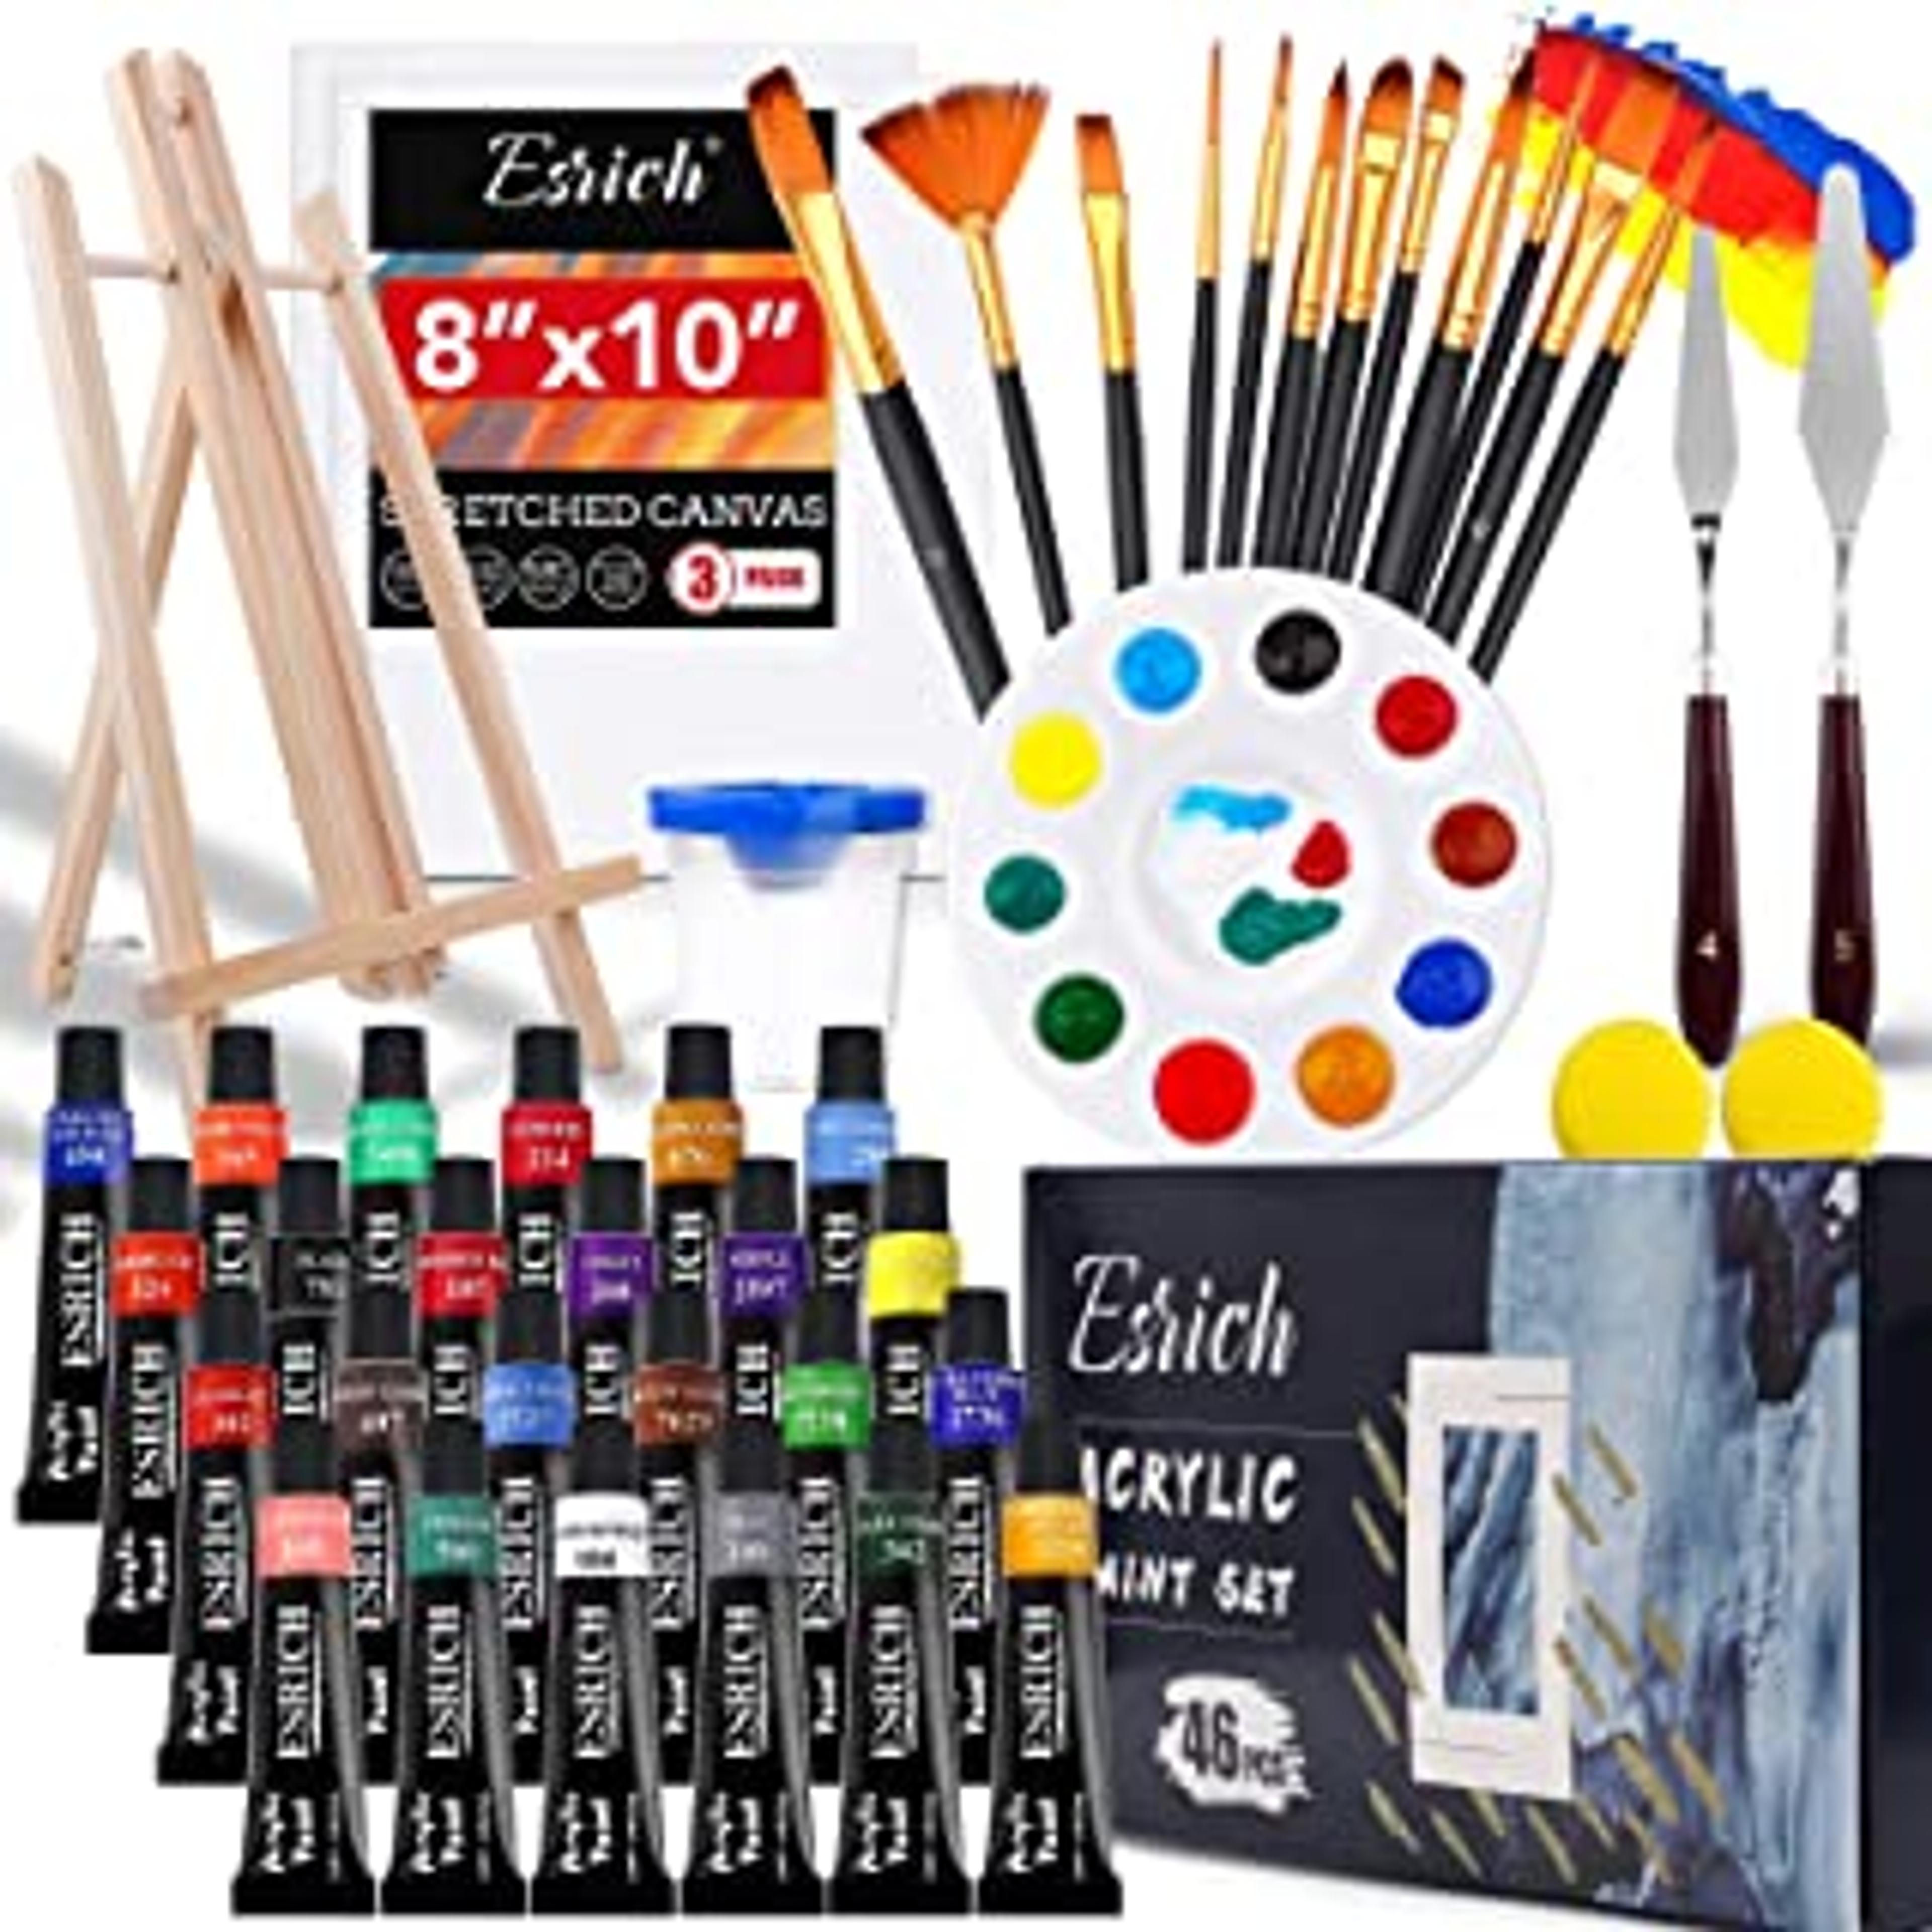 Acrylic Paint Set,46 Piece Professional Painting Supplies with Paint Brushes, Acrylic Paint, Easel, Canvases, Palette, Paint Knives, Brush Cup and Art Sponges for Hobbyists and Beginners : Amazon.ae: Arts & Crafts